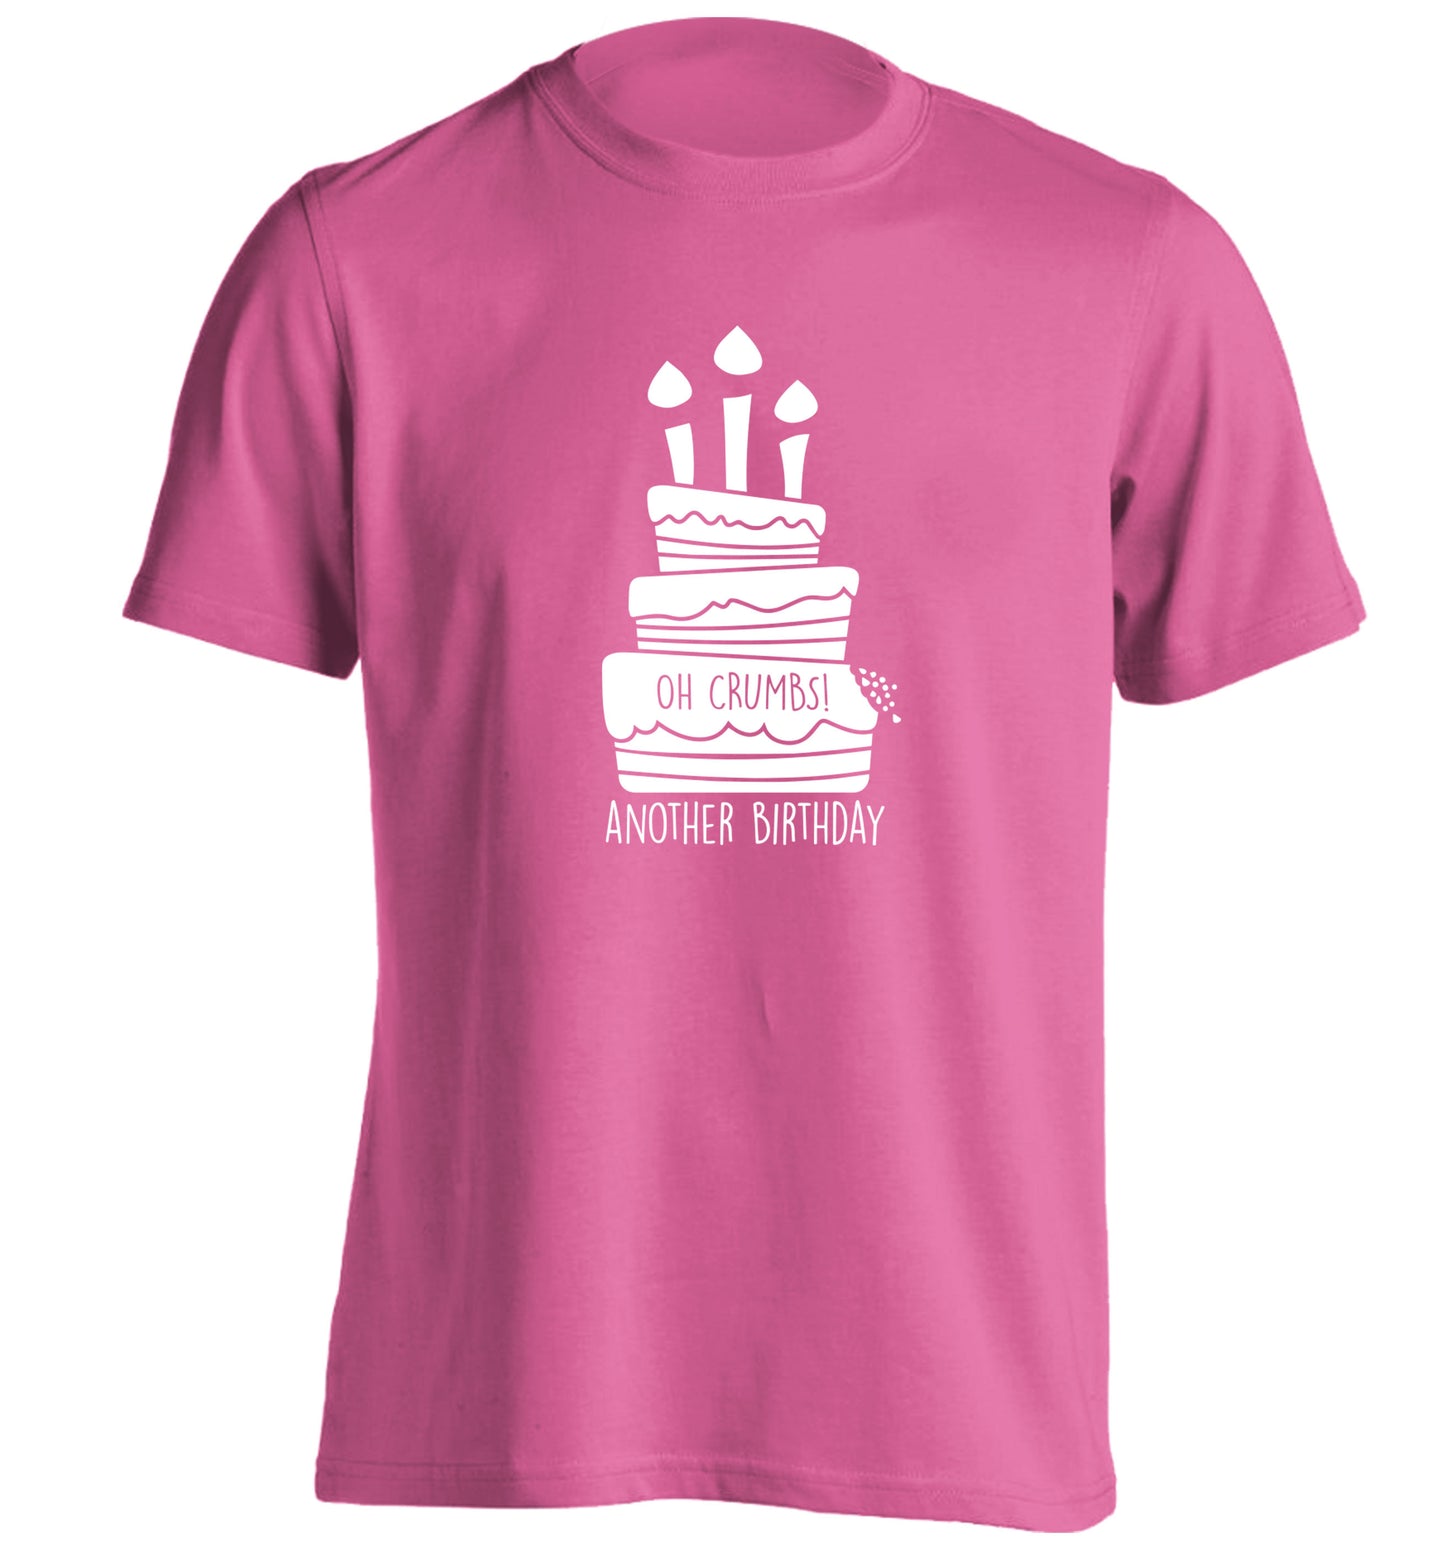 Oh crumbs another birthday! adults unisex pink Tshirt 2XL